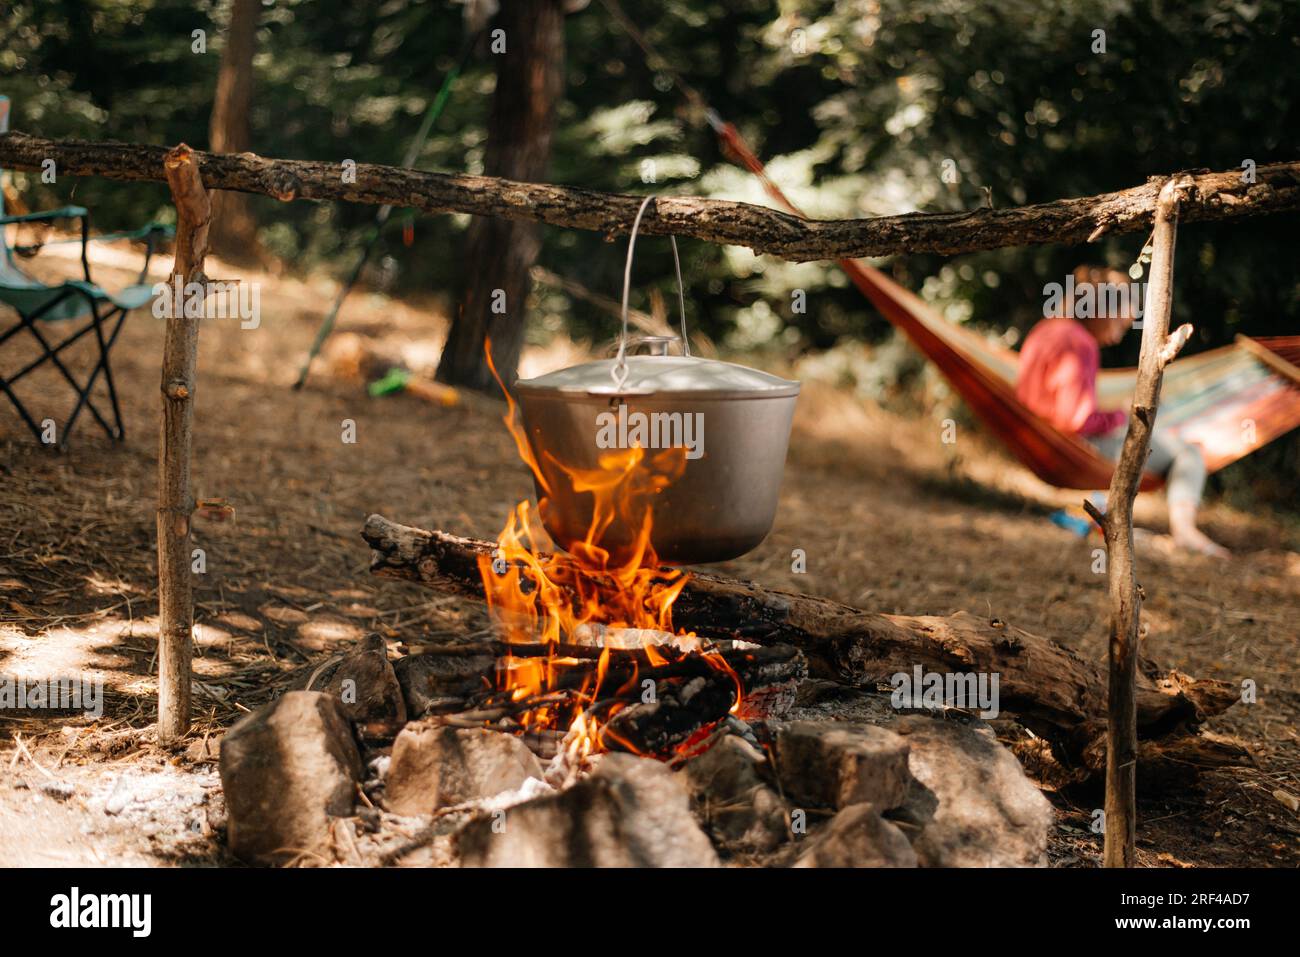 https://c8.alamy.com/comp/2RF4AD7/travel-a-kettle-over-a-fire-burning-on-the-river-and-sunset-backgroun-cooking-over-a-campfire-2RF4AD7.jpg